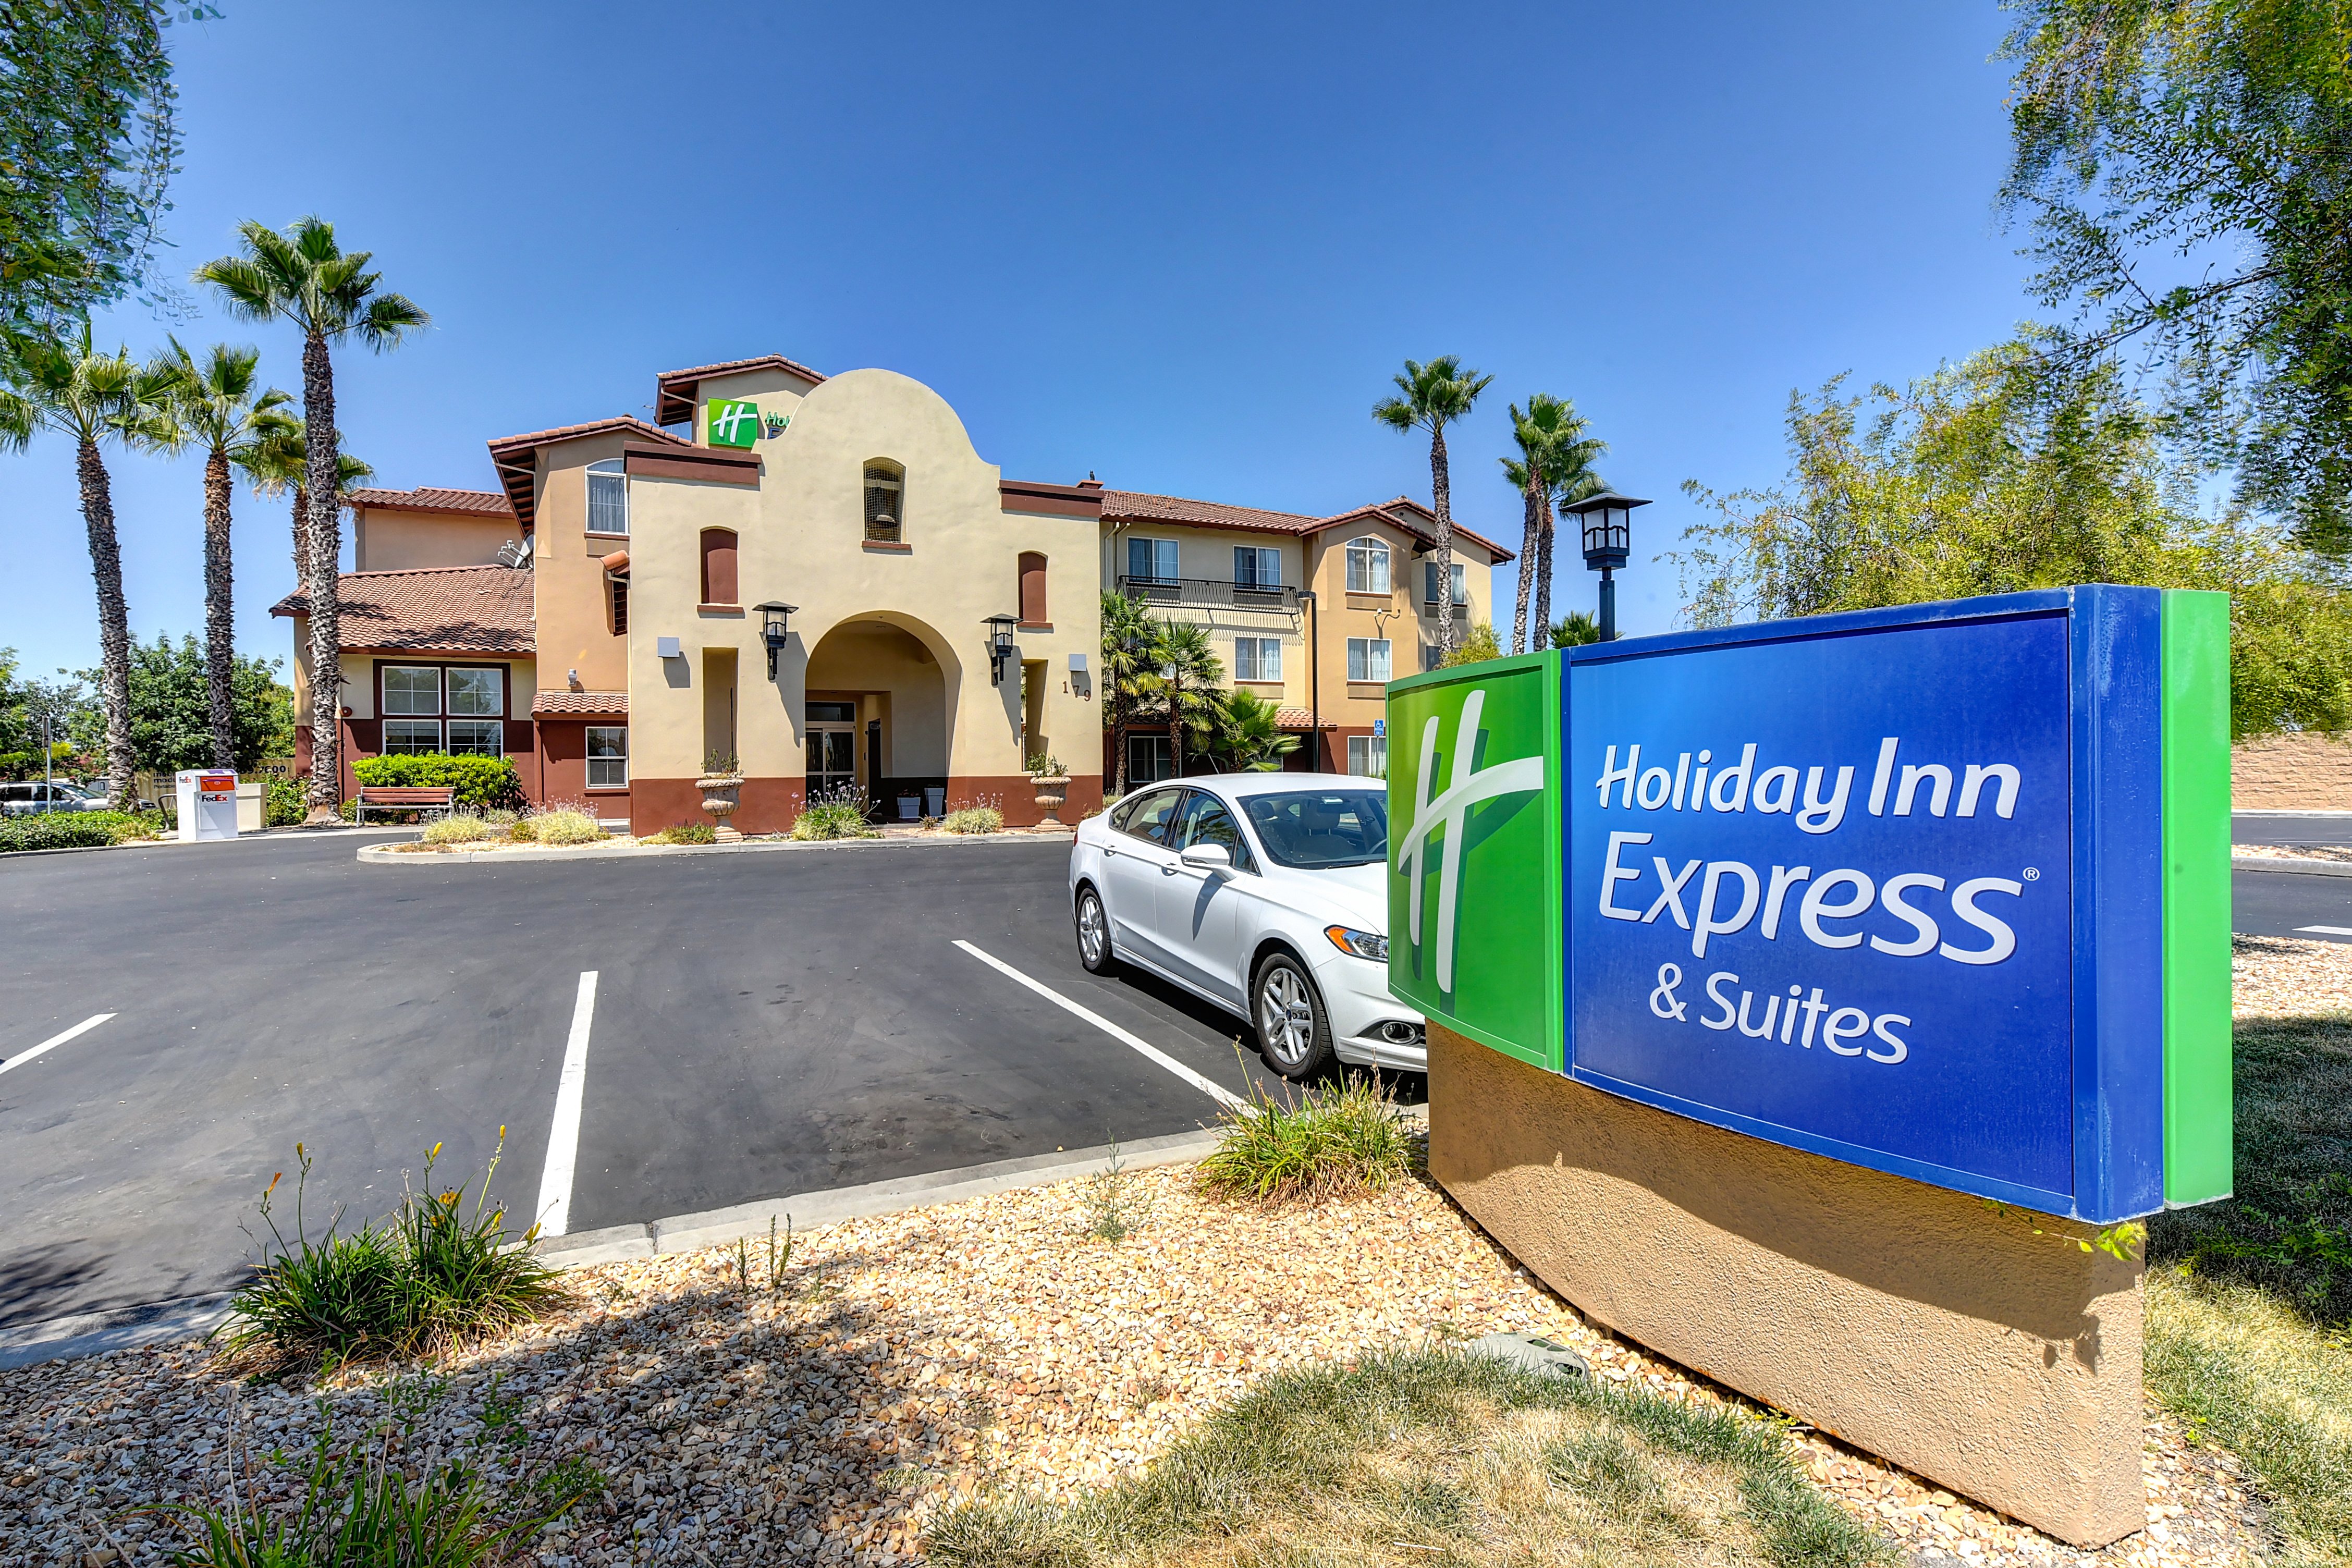 Enjoy free parking. One parking spot available per guest room.